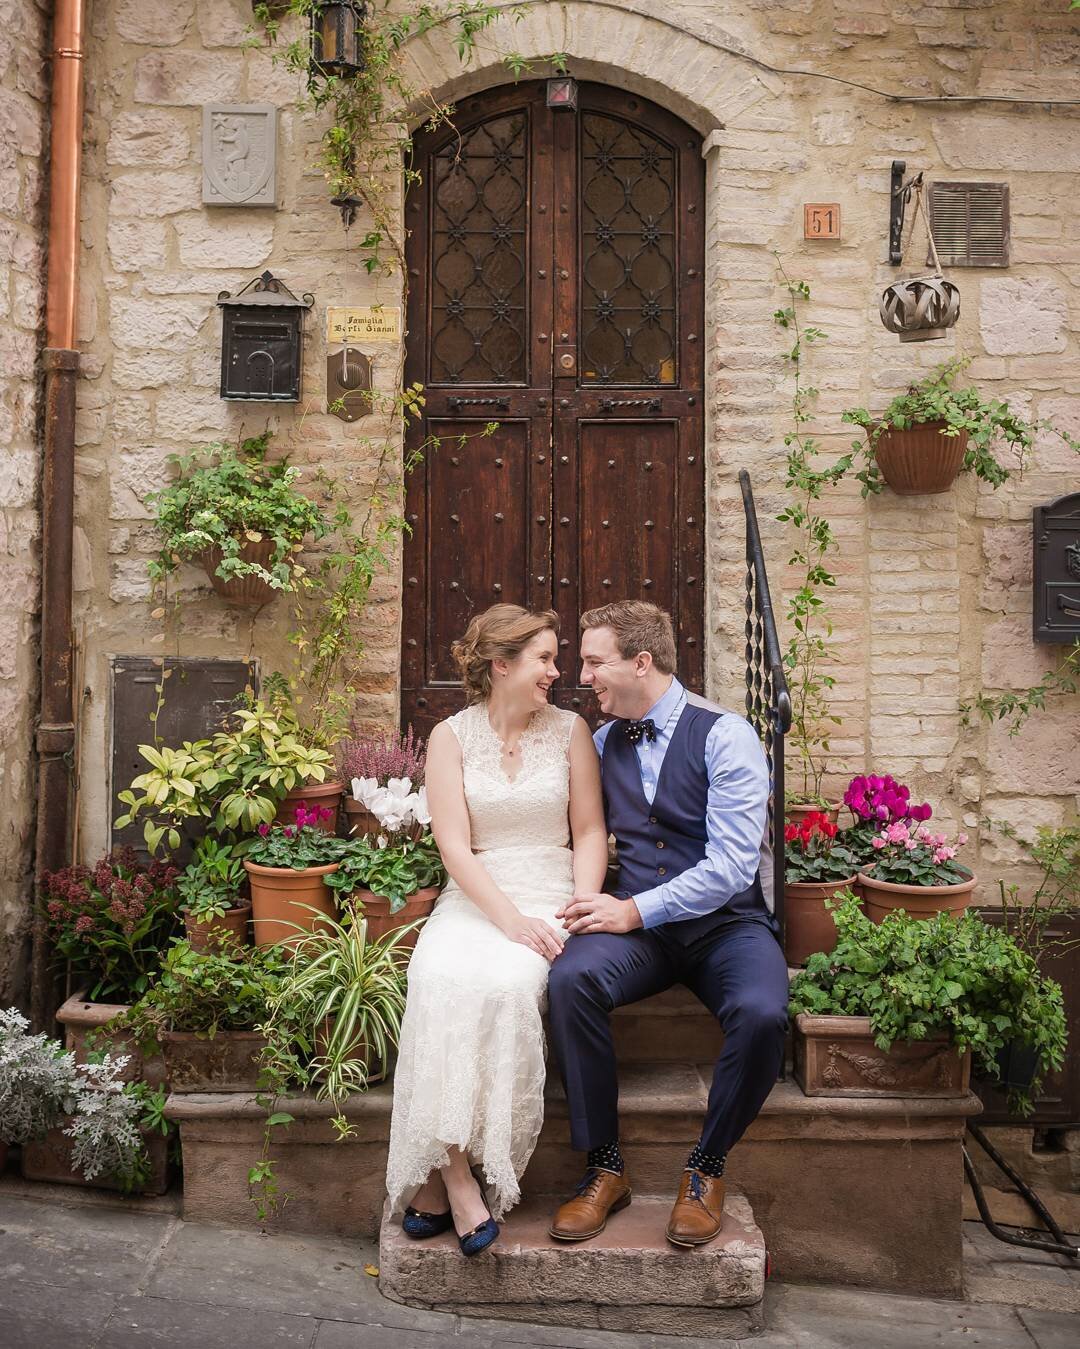 2016 took me to some incredible destinations and I'm so behind on blogging them! Just one from Derek and Clare's session in Assisi, Italy for now!